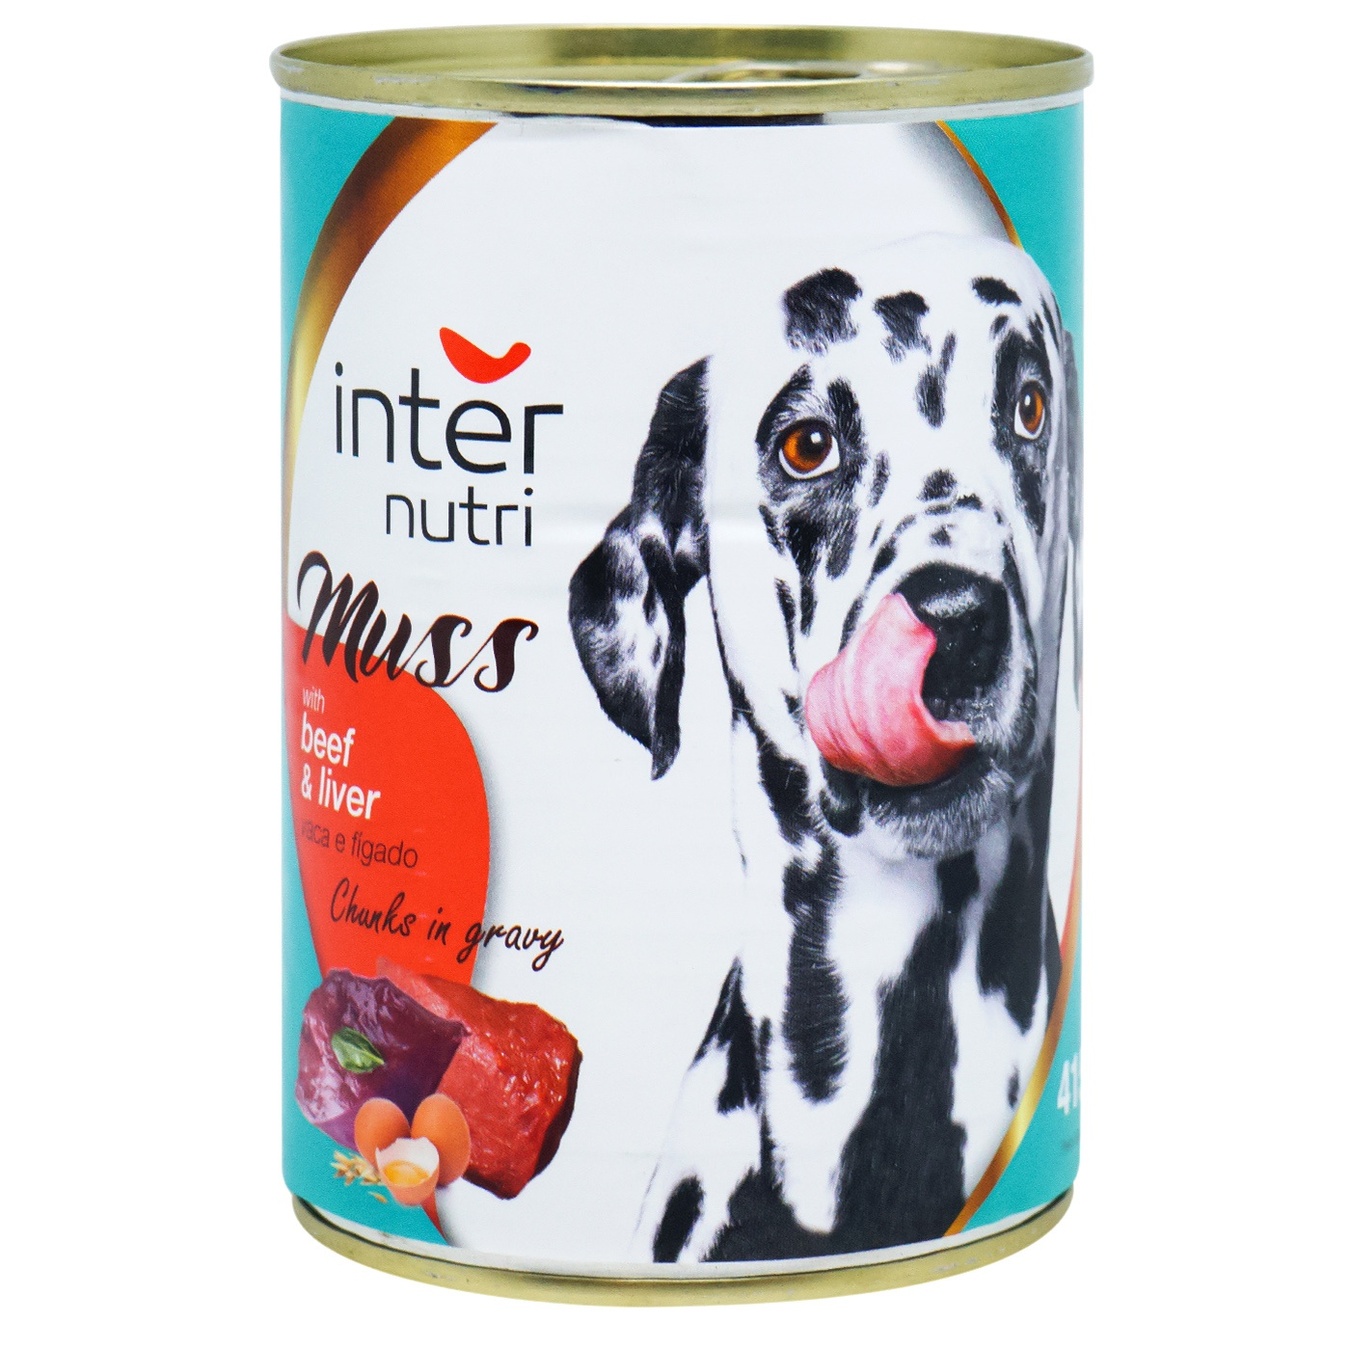 Food Internutri Muss with beef and liver for dogs canned 415g